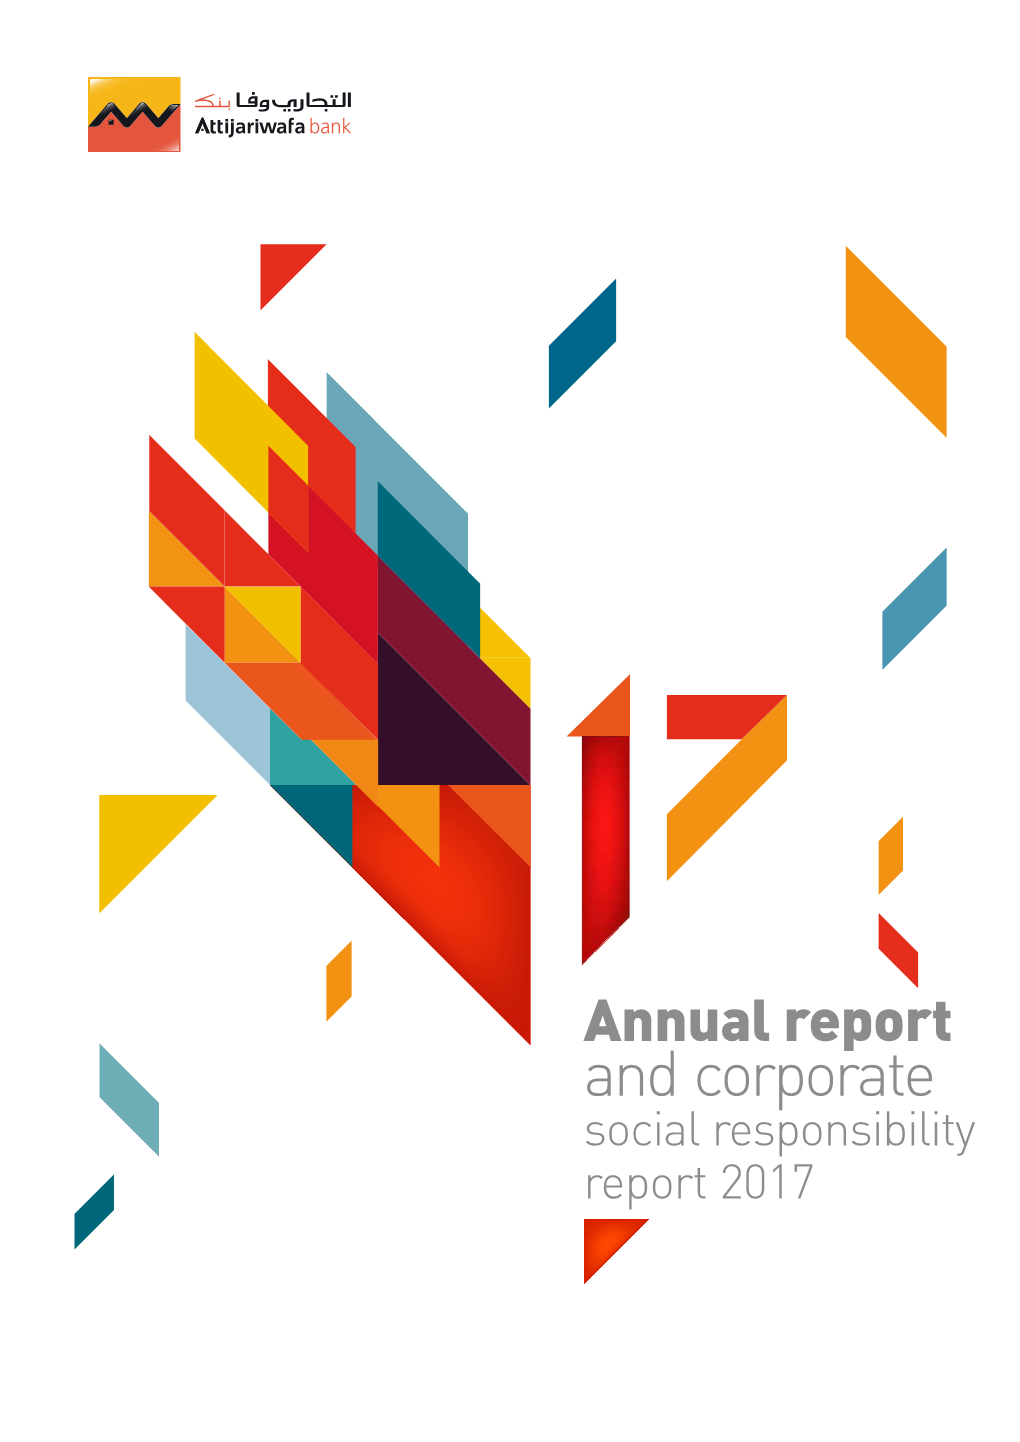 And Corporate Social Responsibility Report 2017